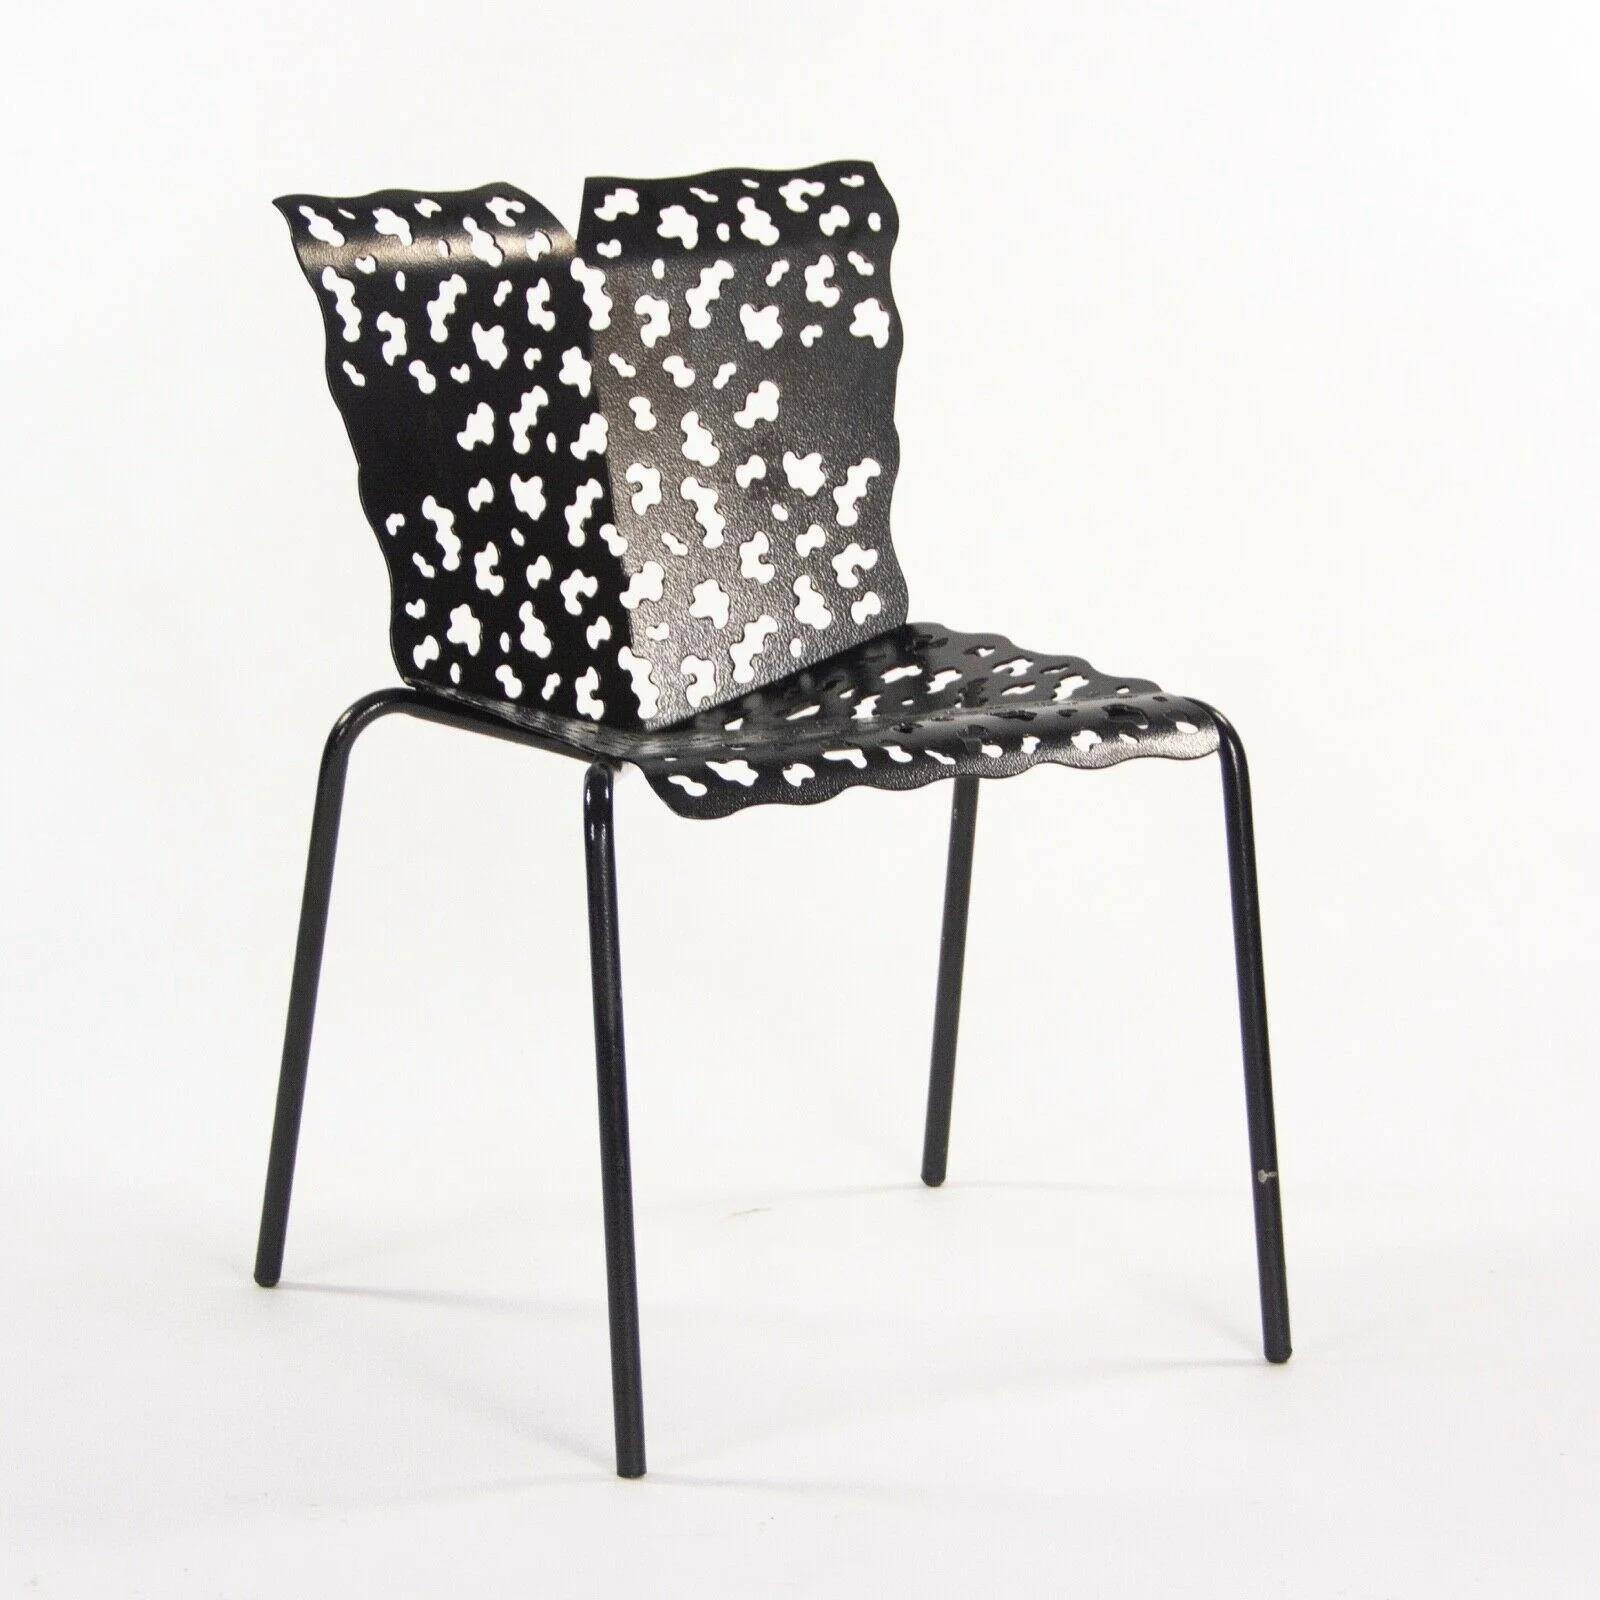 Listed for sale is a Richard Schultz Topiary Collection stacking cafe chair prototype with a black powder-coated finish. This is a marvelous and rare example of topiary collection chair. The frame is in terrific shape with some light wear. This